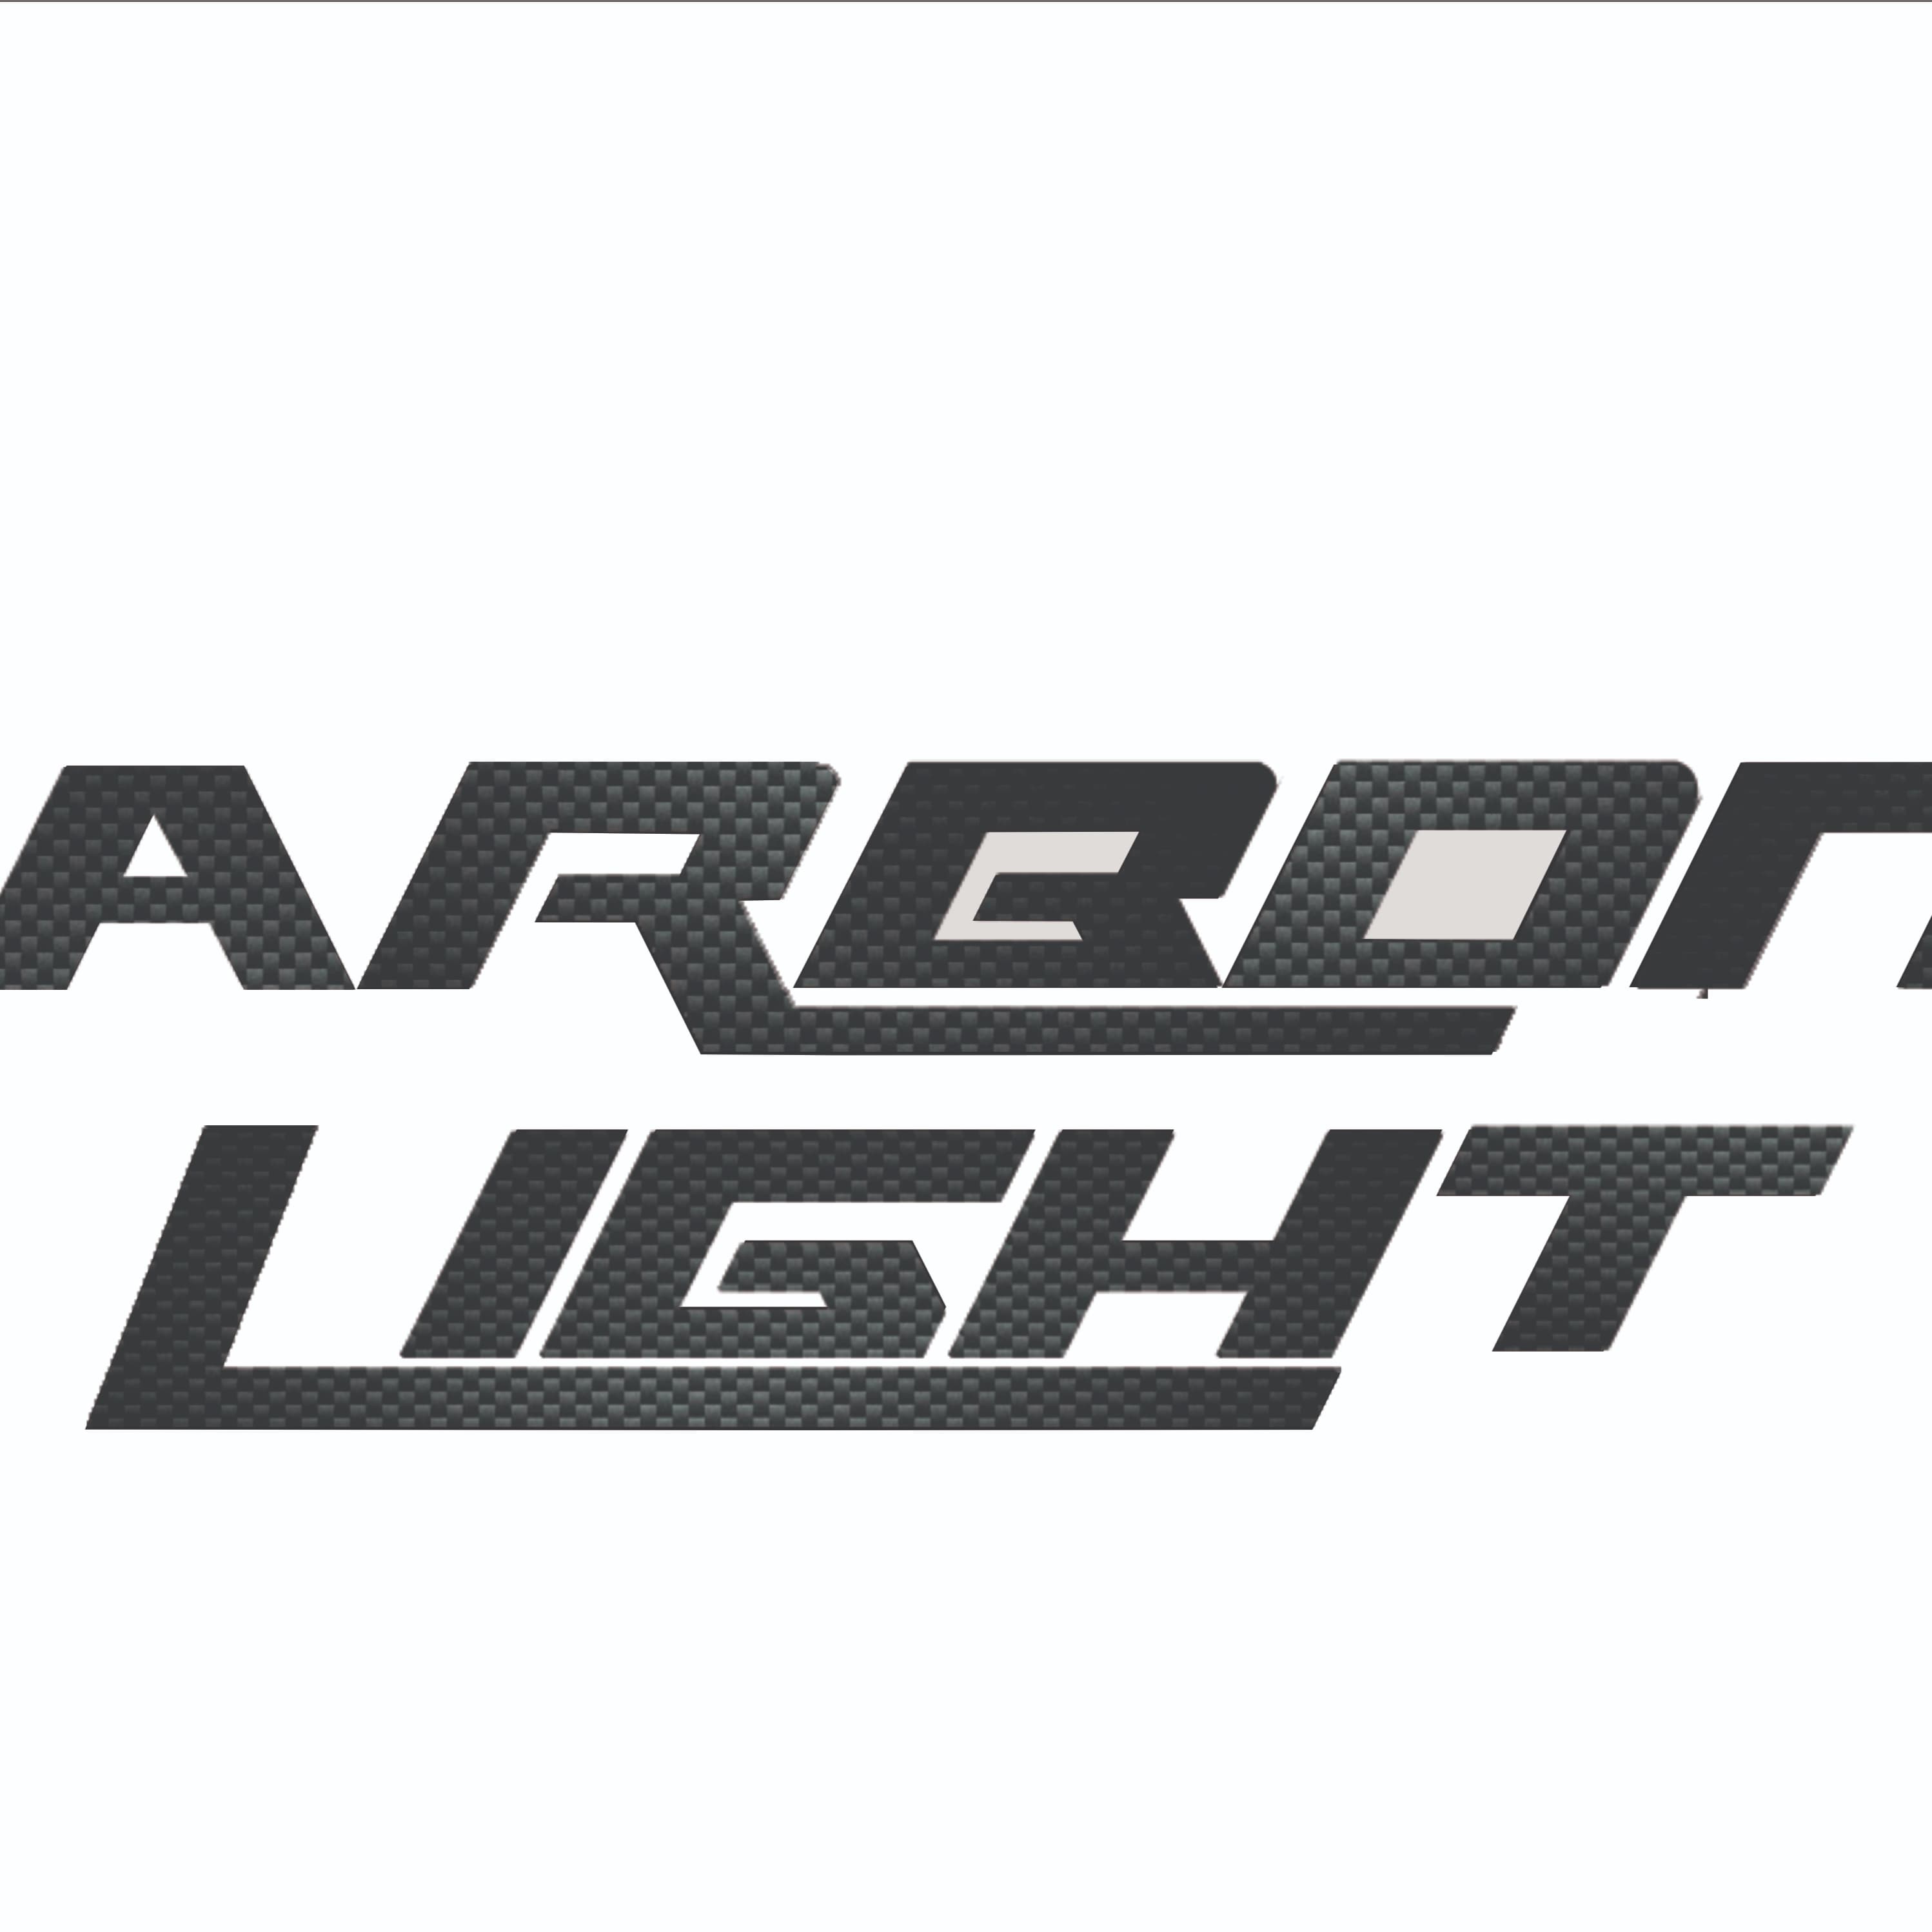 carbon light private limited's logo